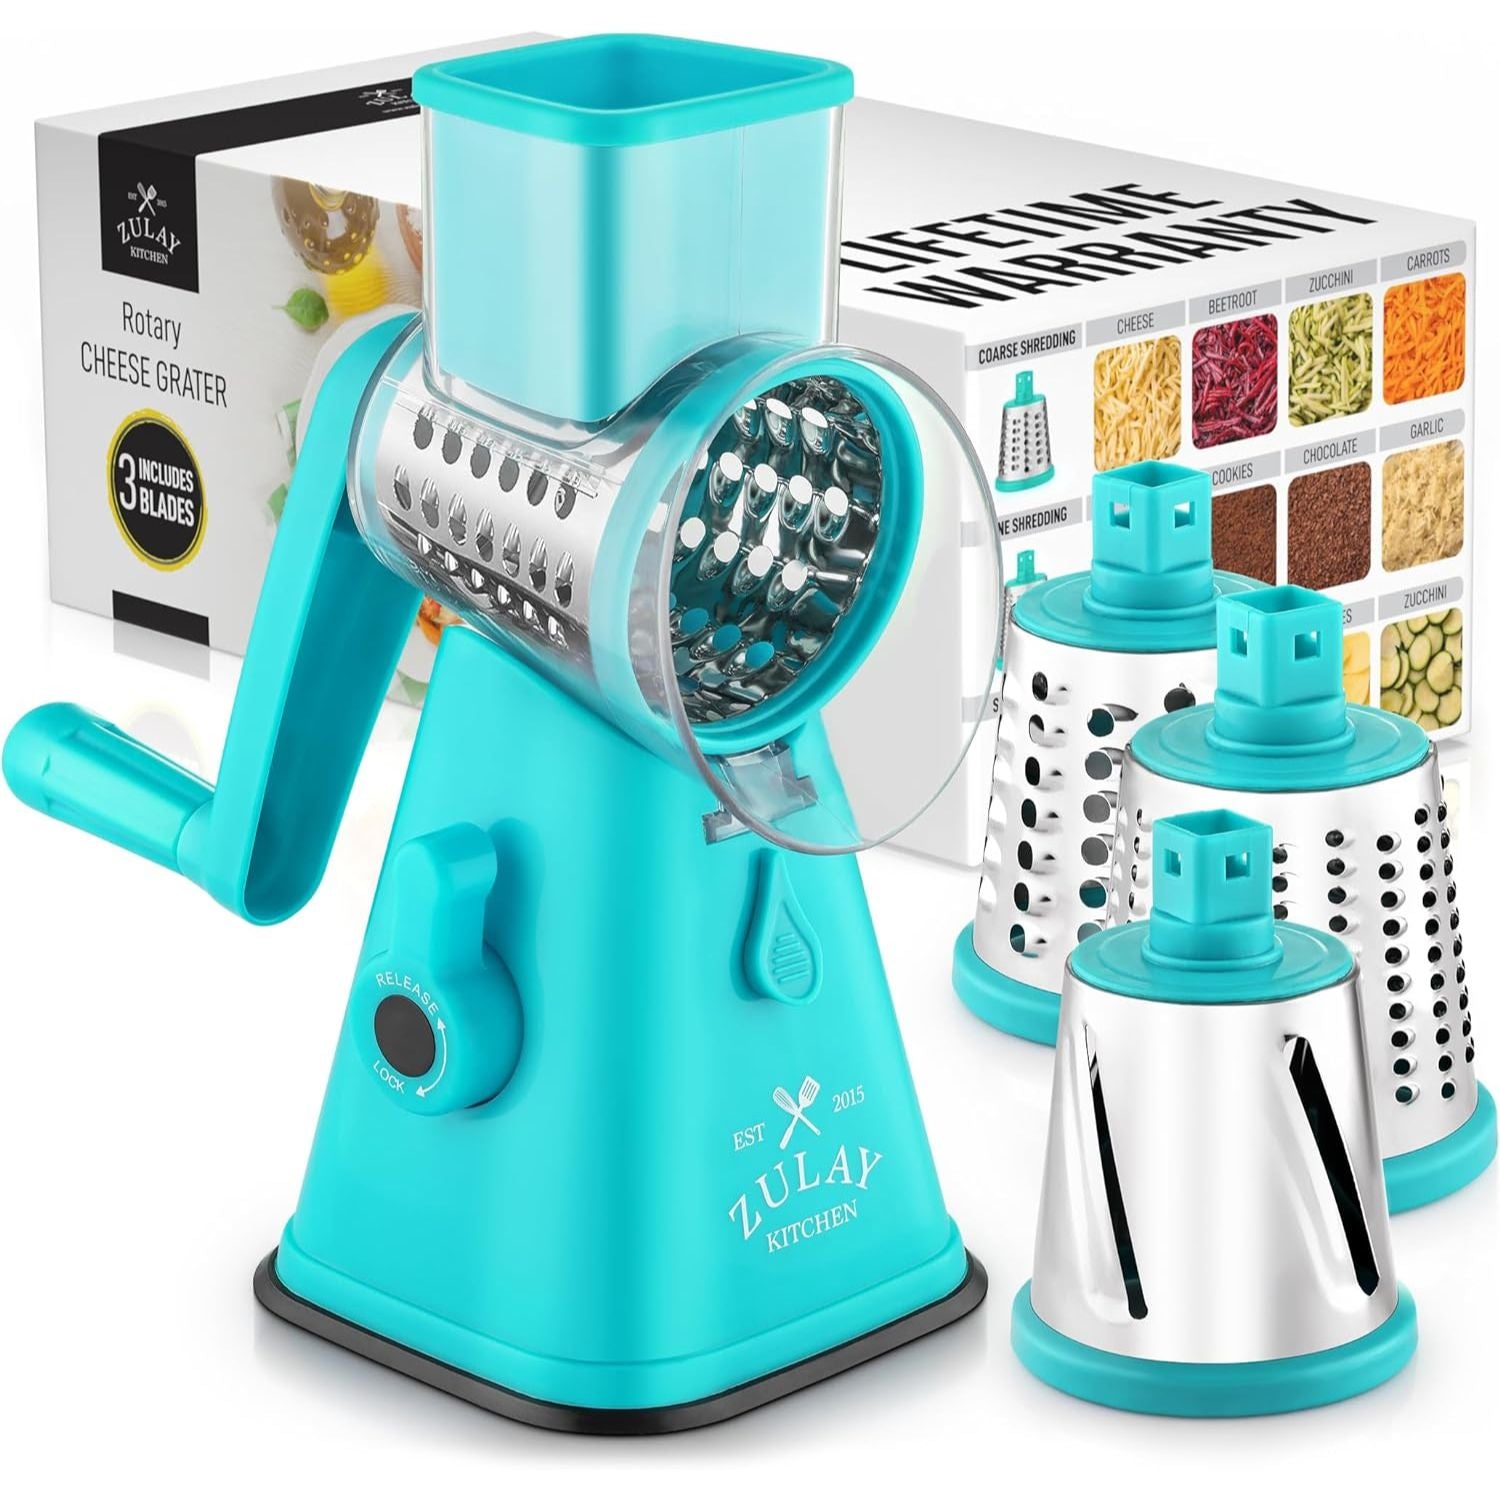 Zulay Kitchen Manual Rotary Cheese Grater with Handle - Light